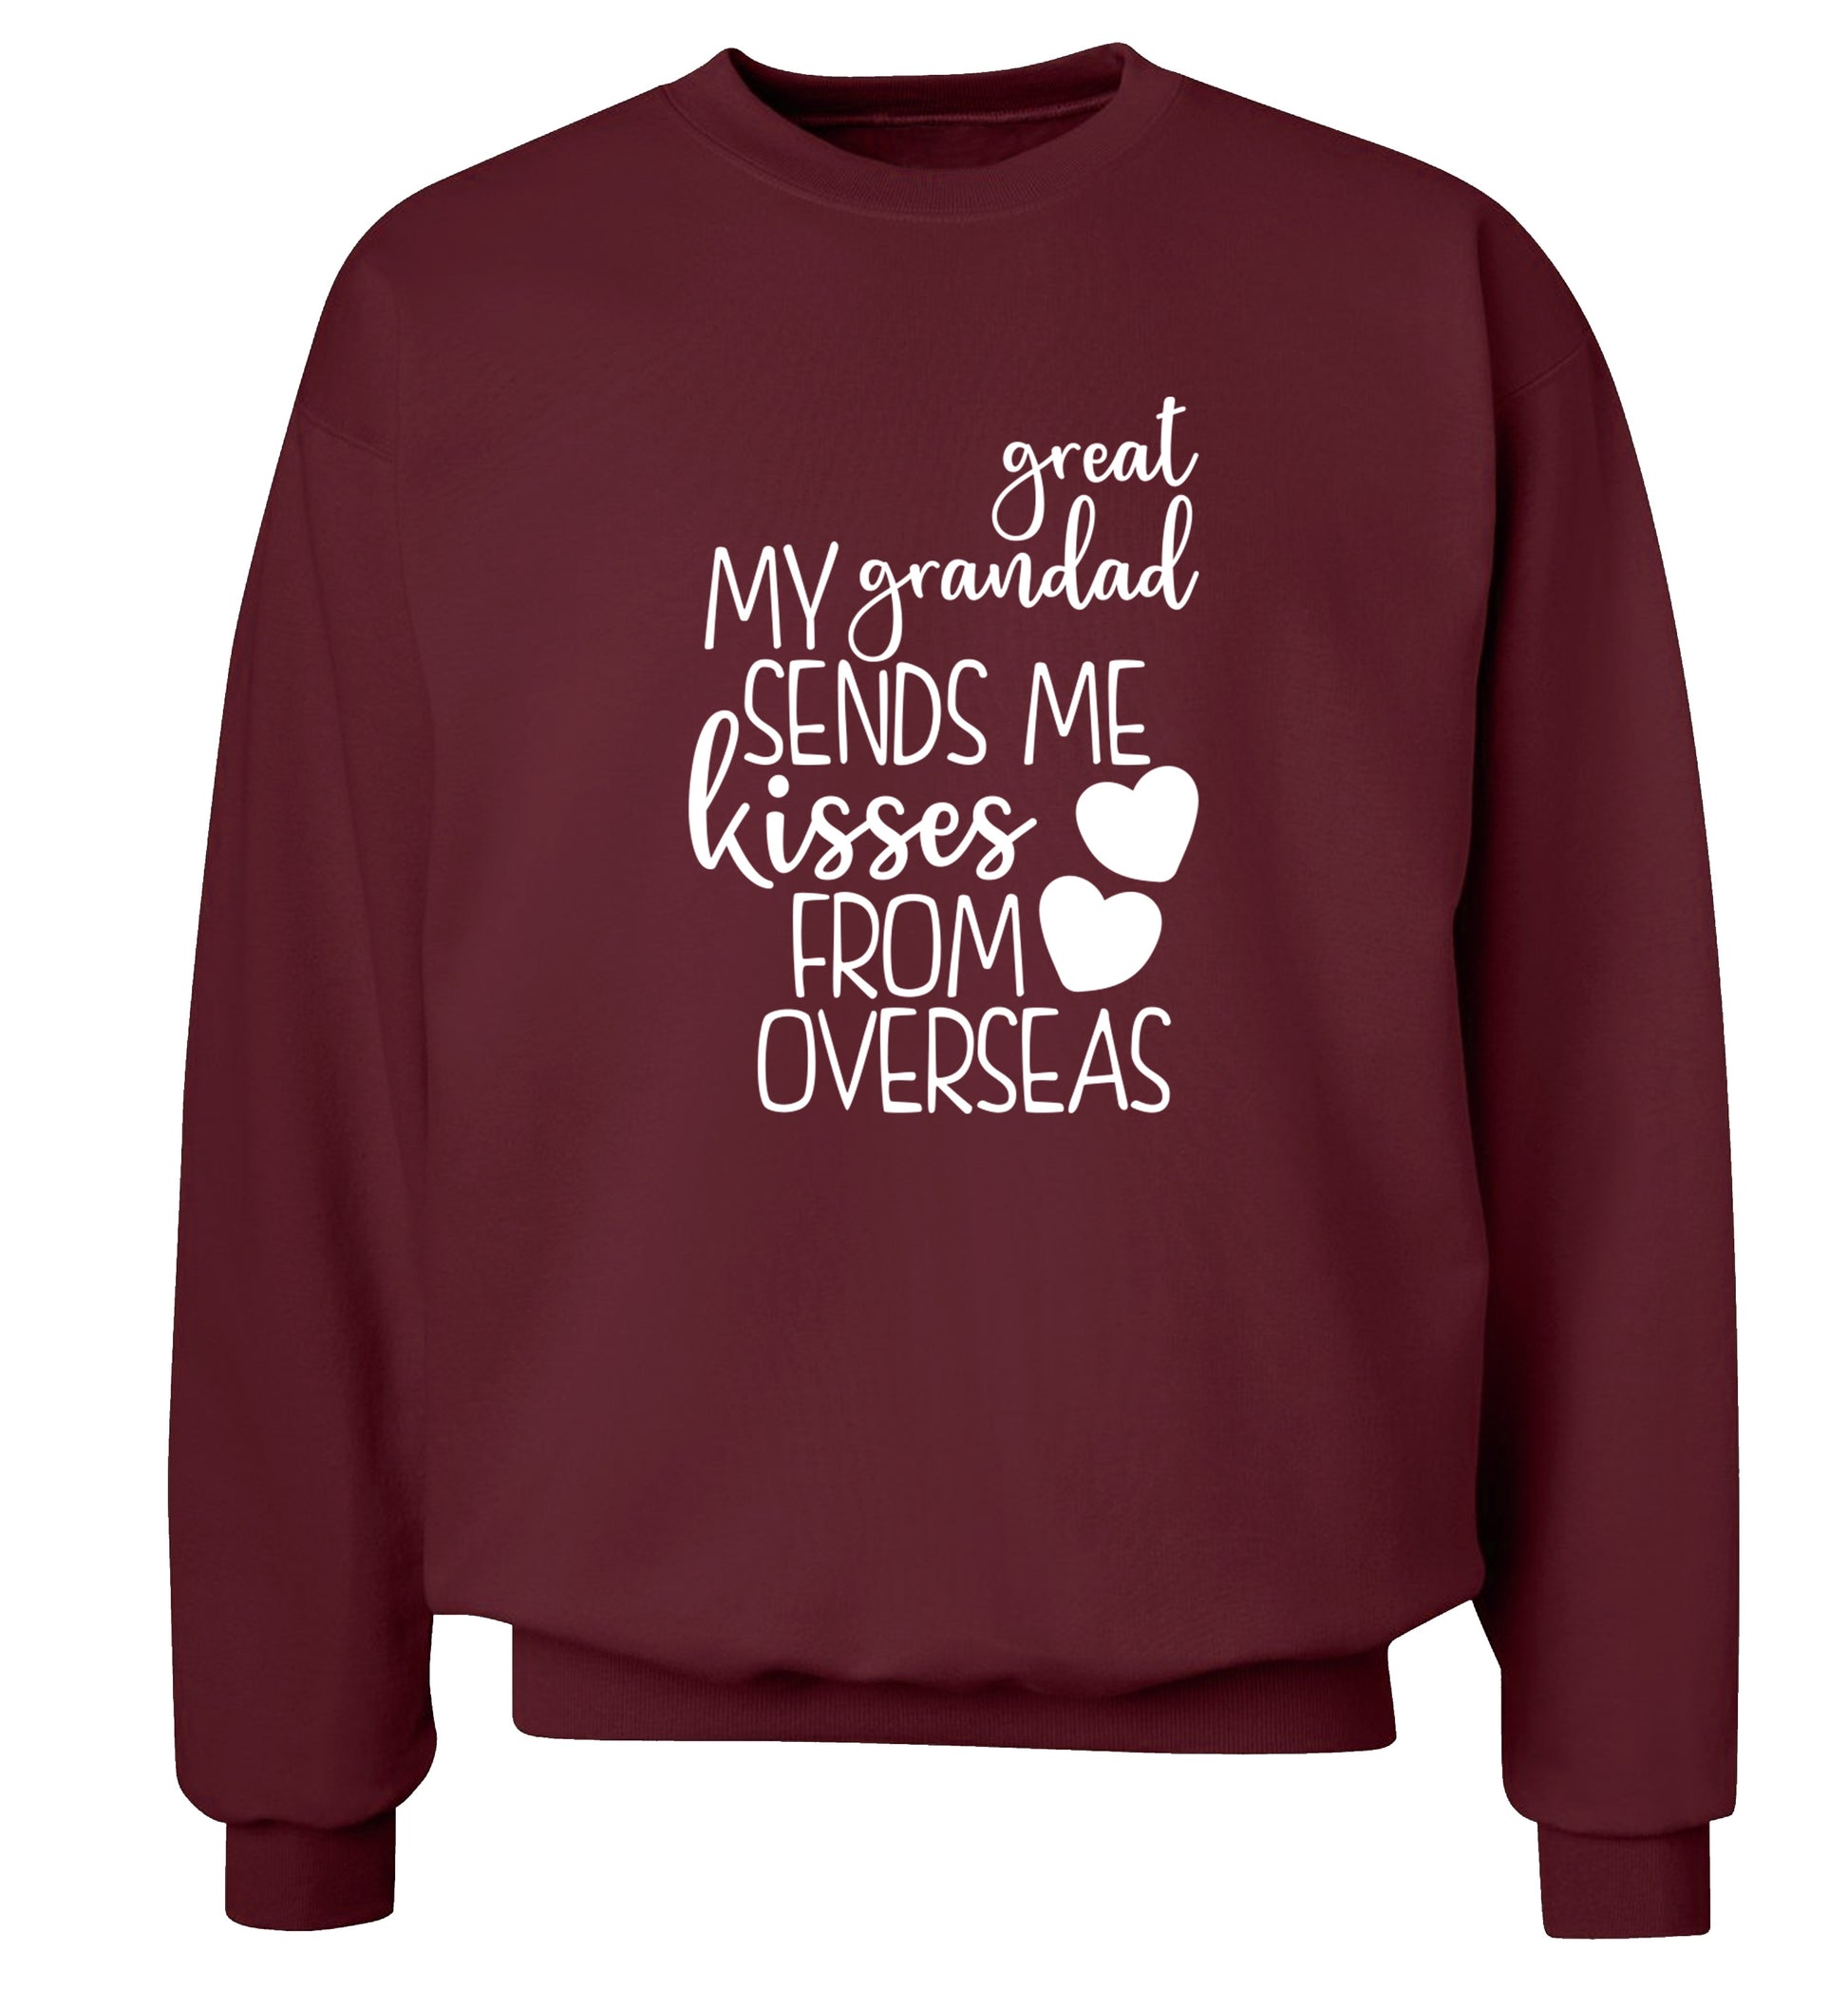 My great grandad sends me kisses from overseas Adult's unisex maroon Sweater 2XL